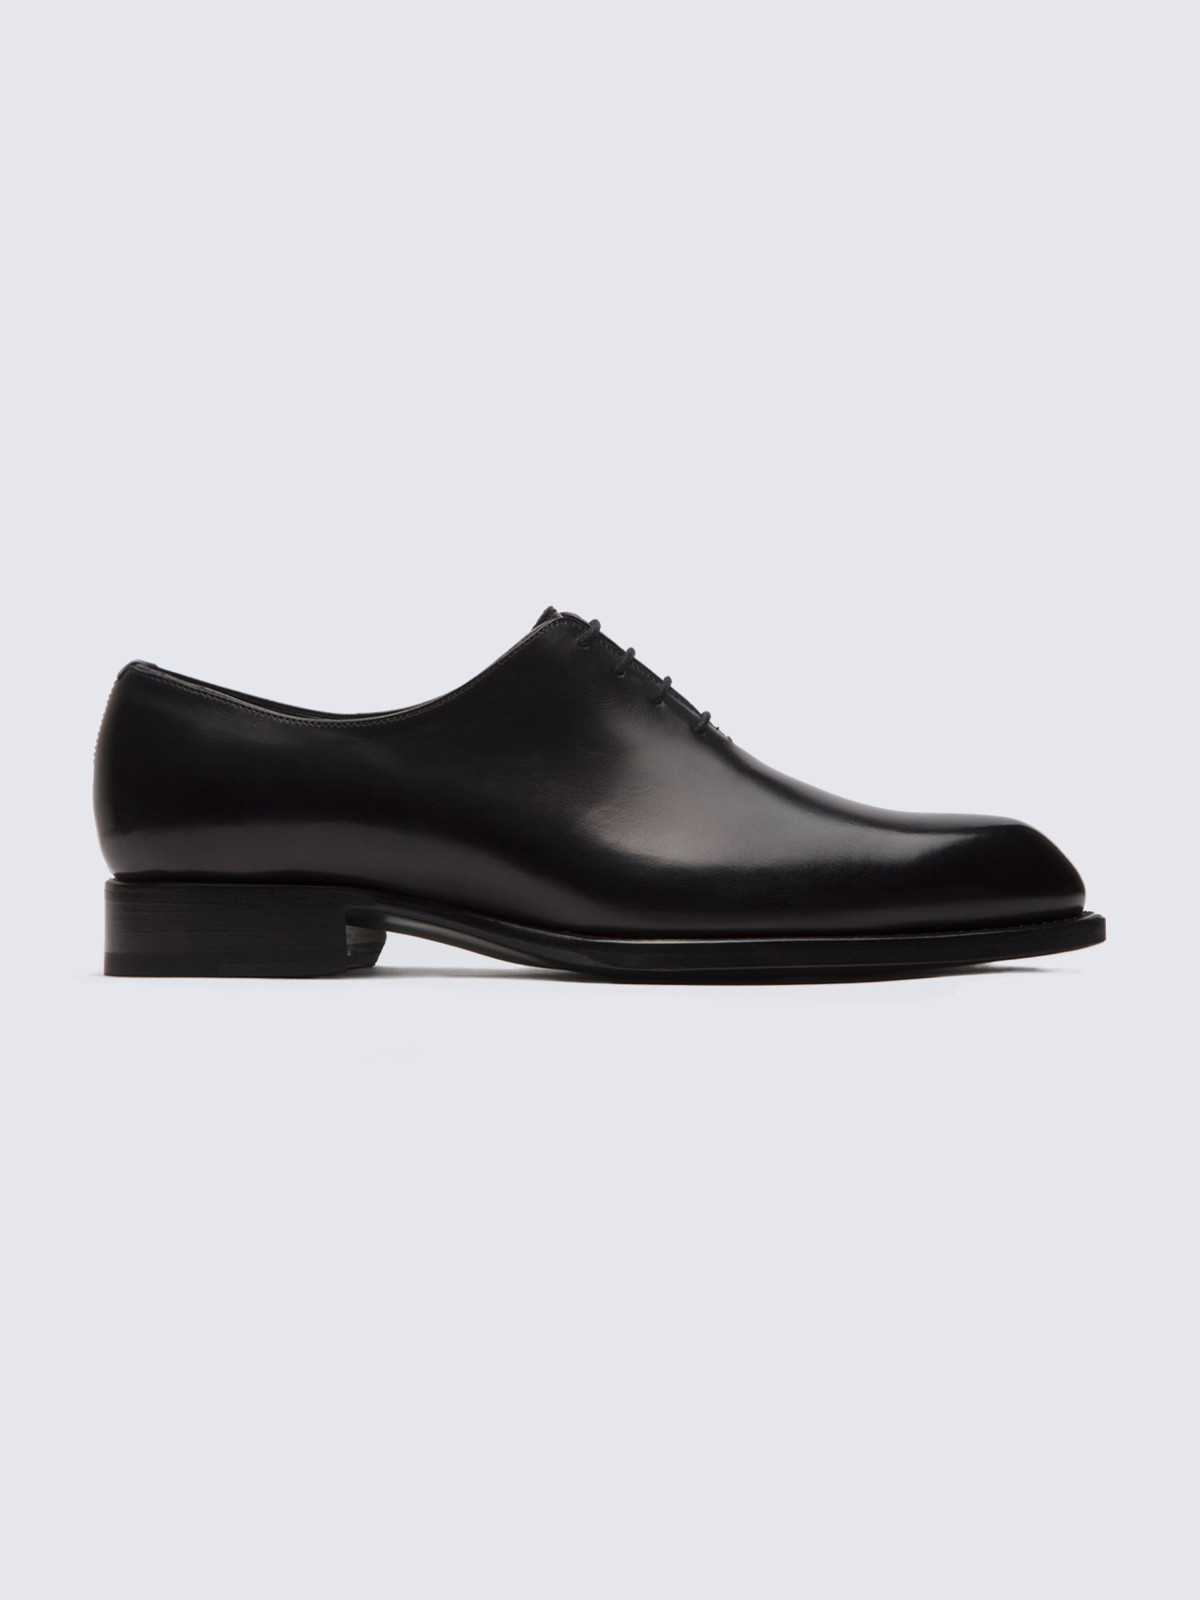 Black calf leather oxford shoes | Brioni® US Official Store